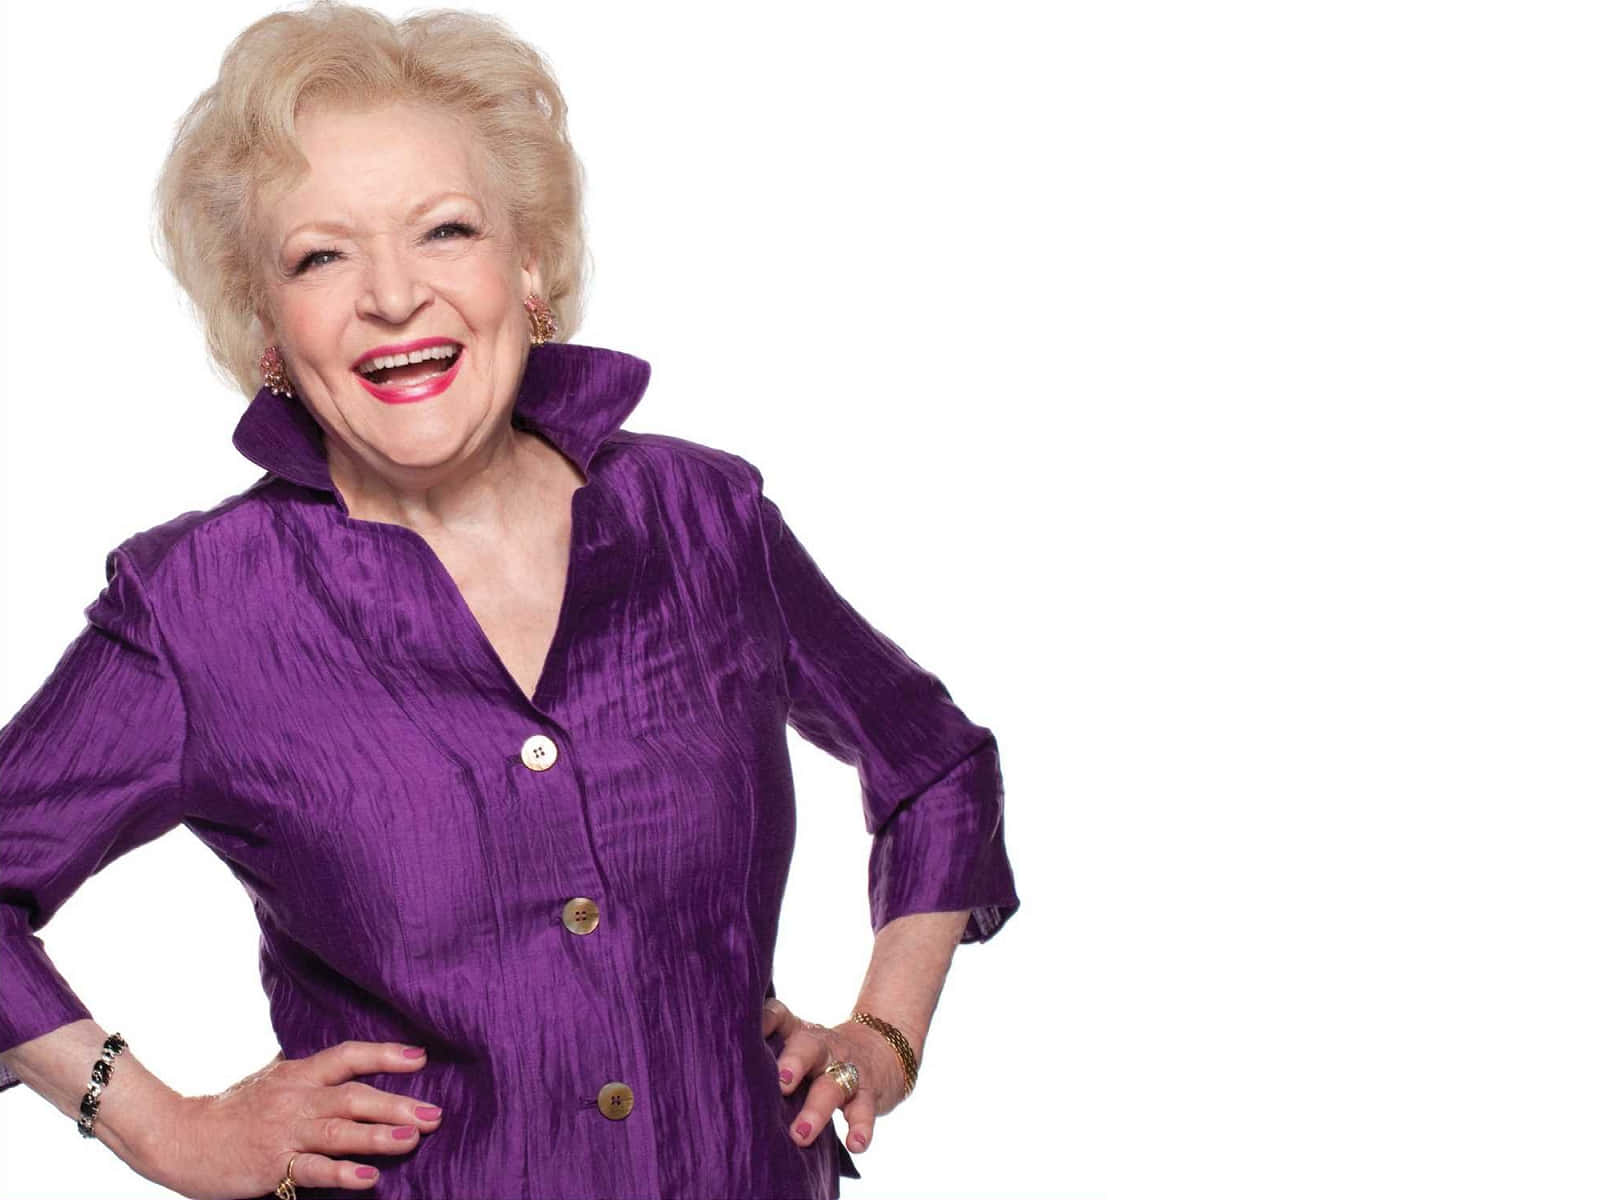 Betty White smiling in an elegant outfit